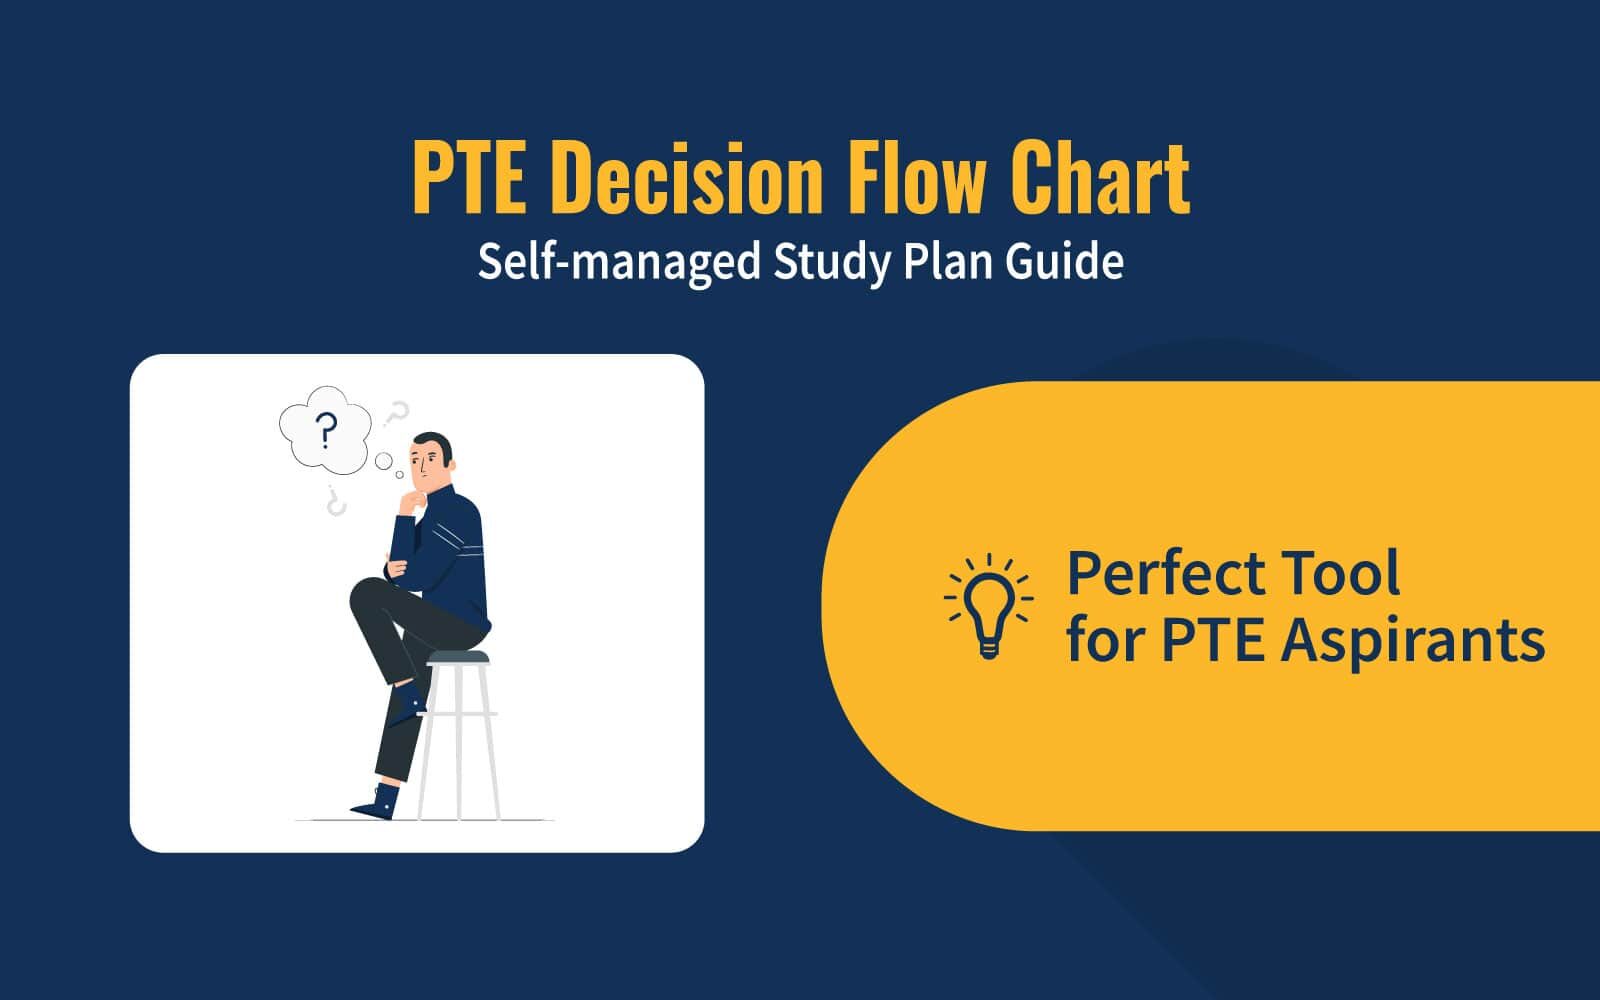 PTE Decision Flow Chart: Self-managed Study Plan Guide